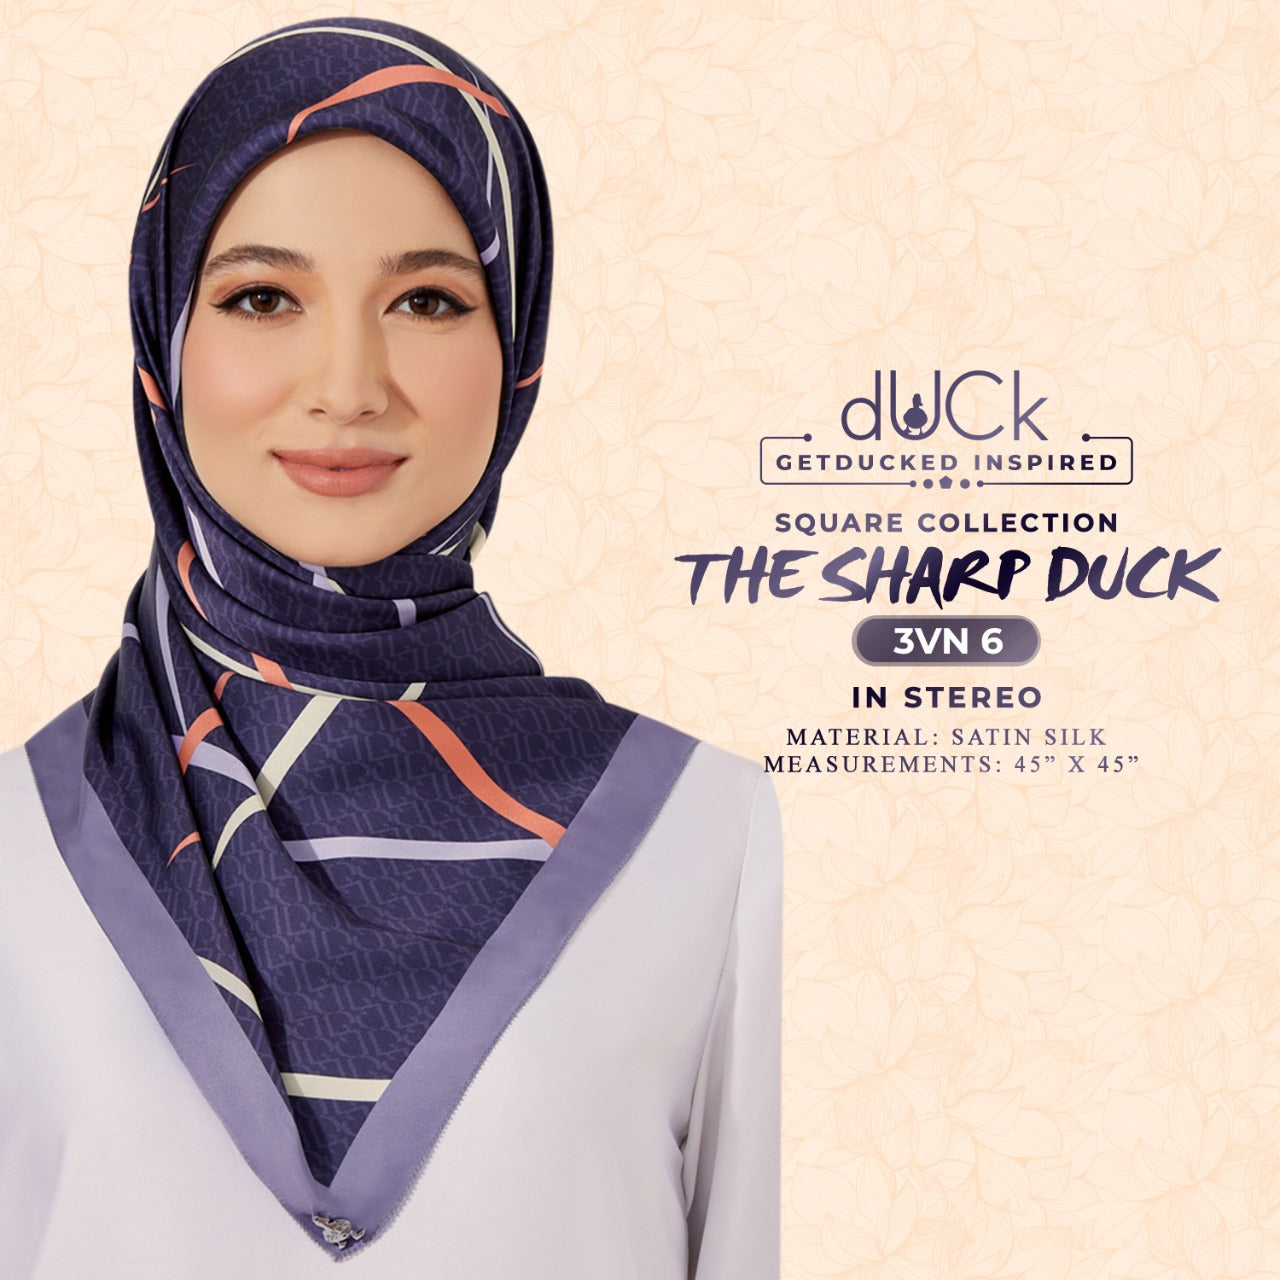 The Sharp dUCk Inspired Square Collection